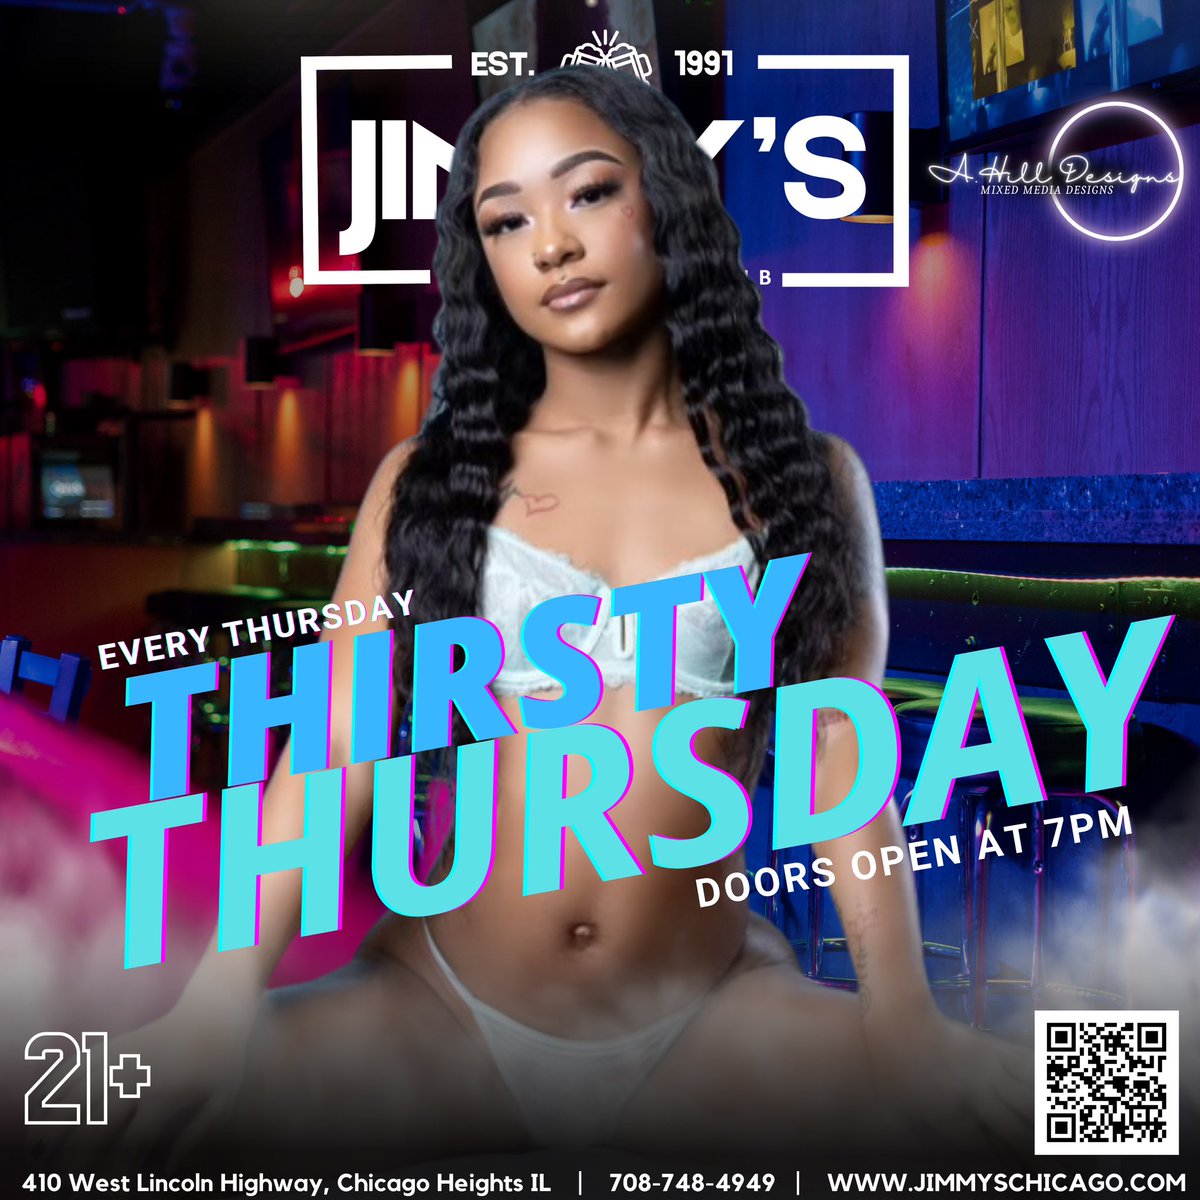 🎉 Quench Your Week with Thirsty Thursday at Jimmy’s! 🎉

Featured Dancer: @hol.lywood_ 
Beats & Visuals by: @ahilldesignsllc

#ThirstyThursday #JimmyGentlemenClub #VibrantEvenings #DanceTillYouDrop #MidweekParty #NightlifeThrills #OnlyGoodVibes #CocktailDelights